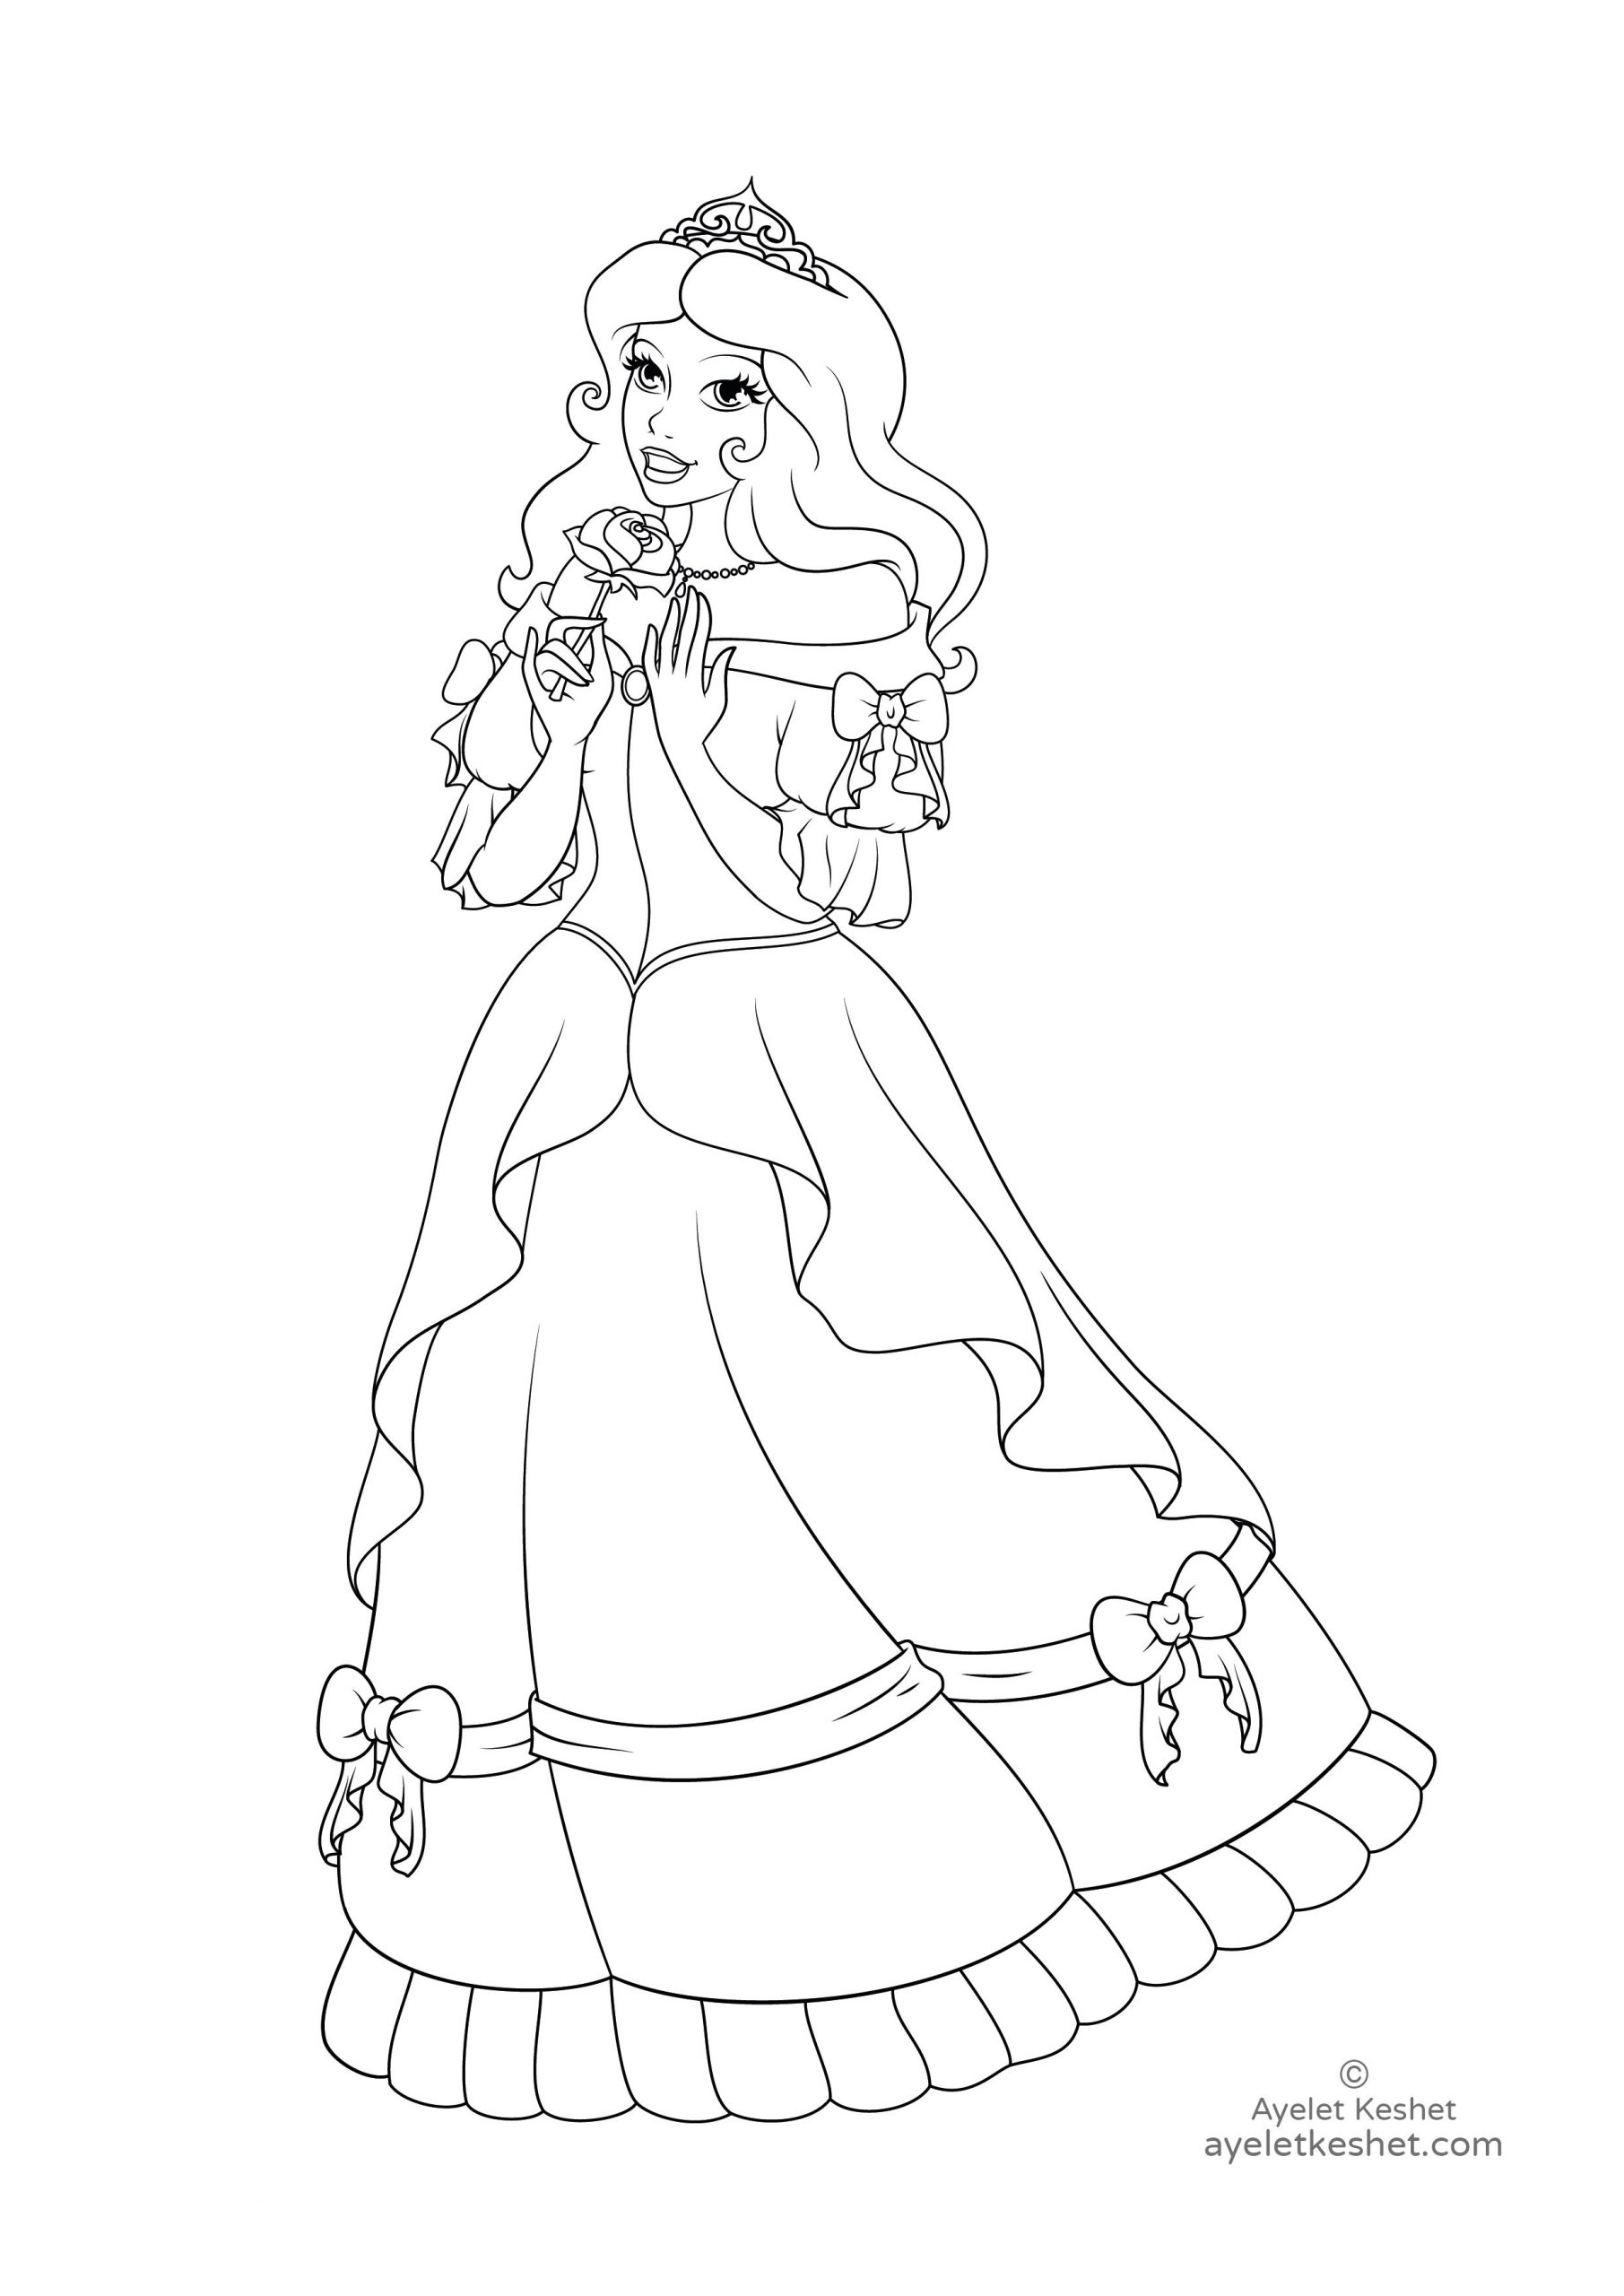 Coloring Pages : Coloring Pages Printable Princess For Kids ...